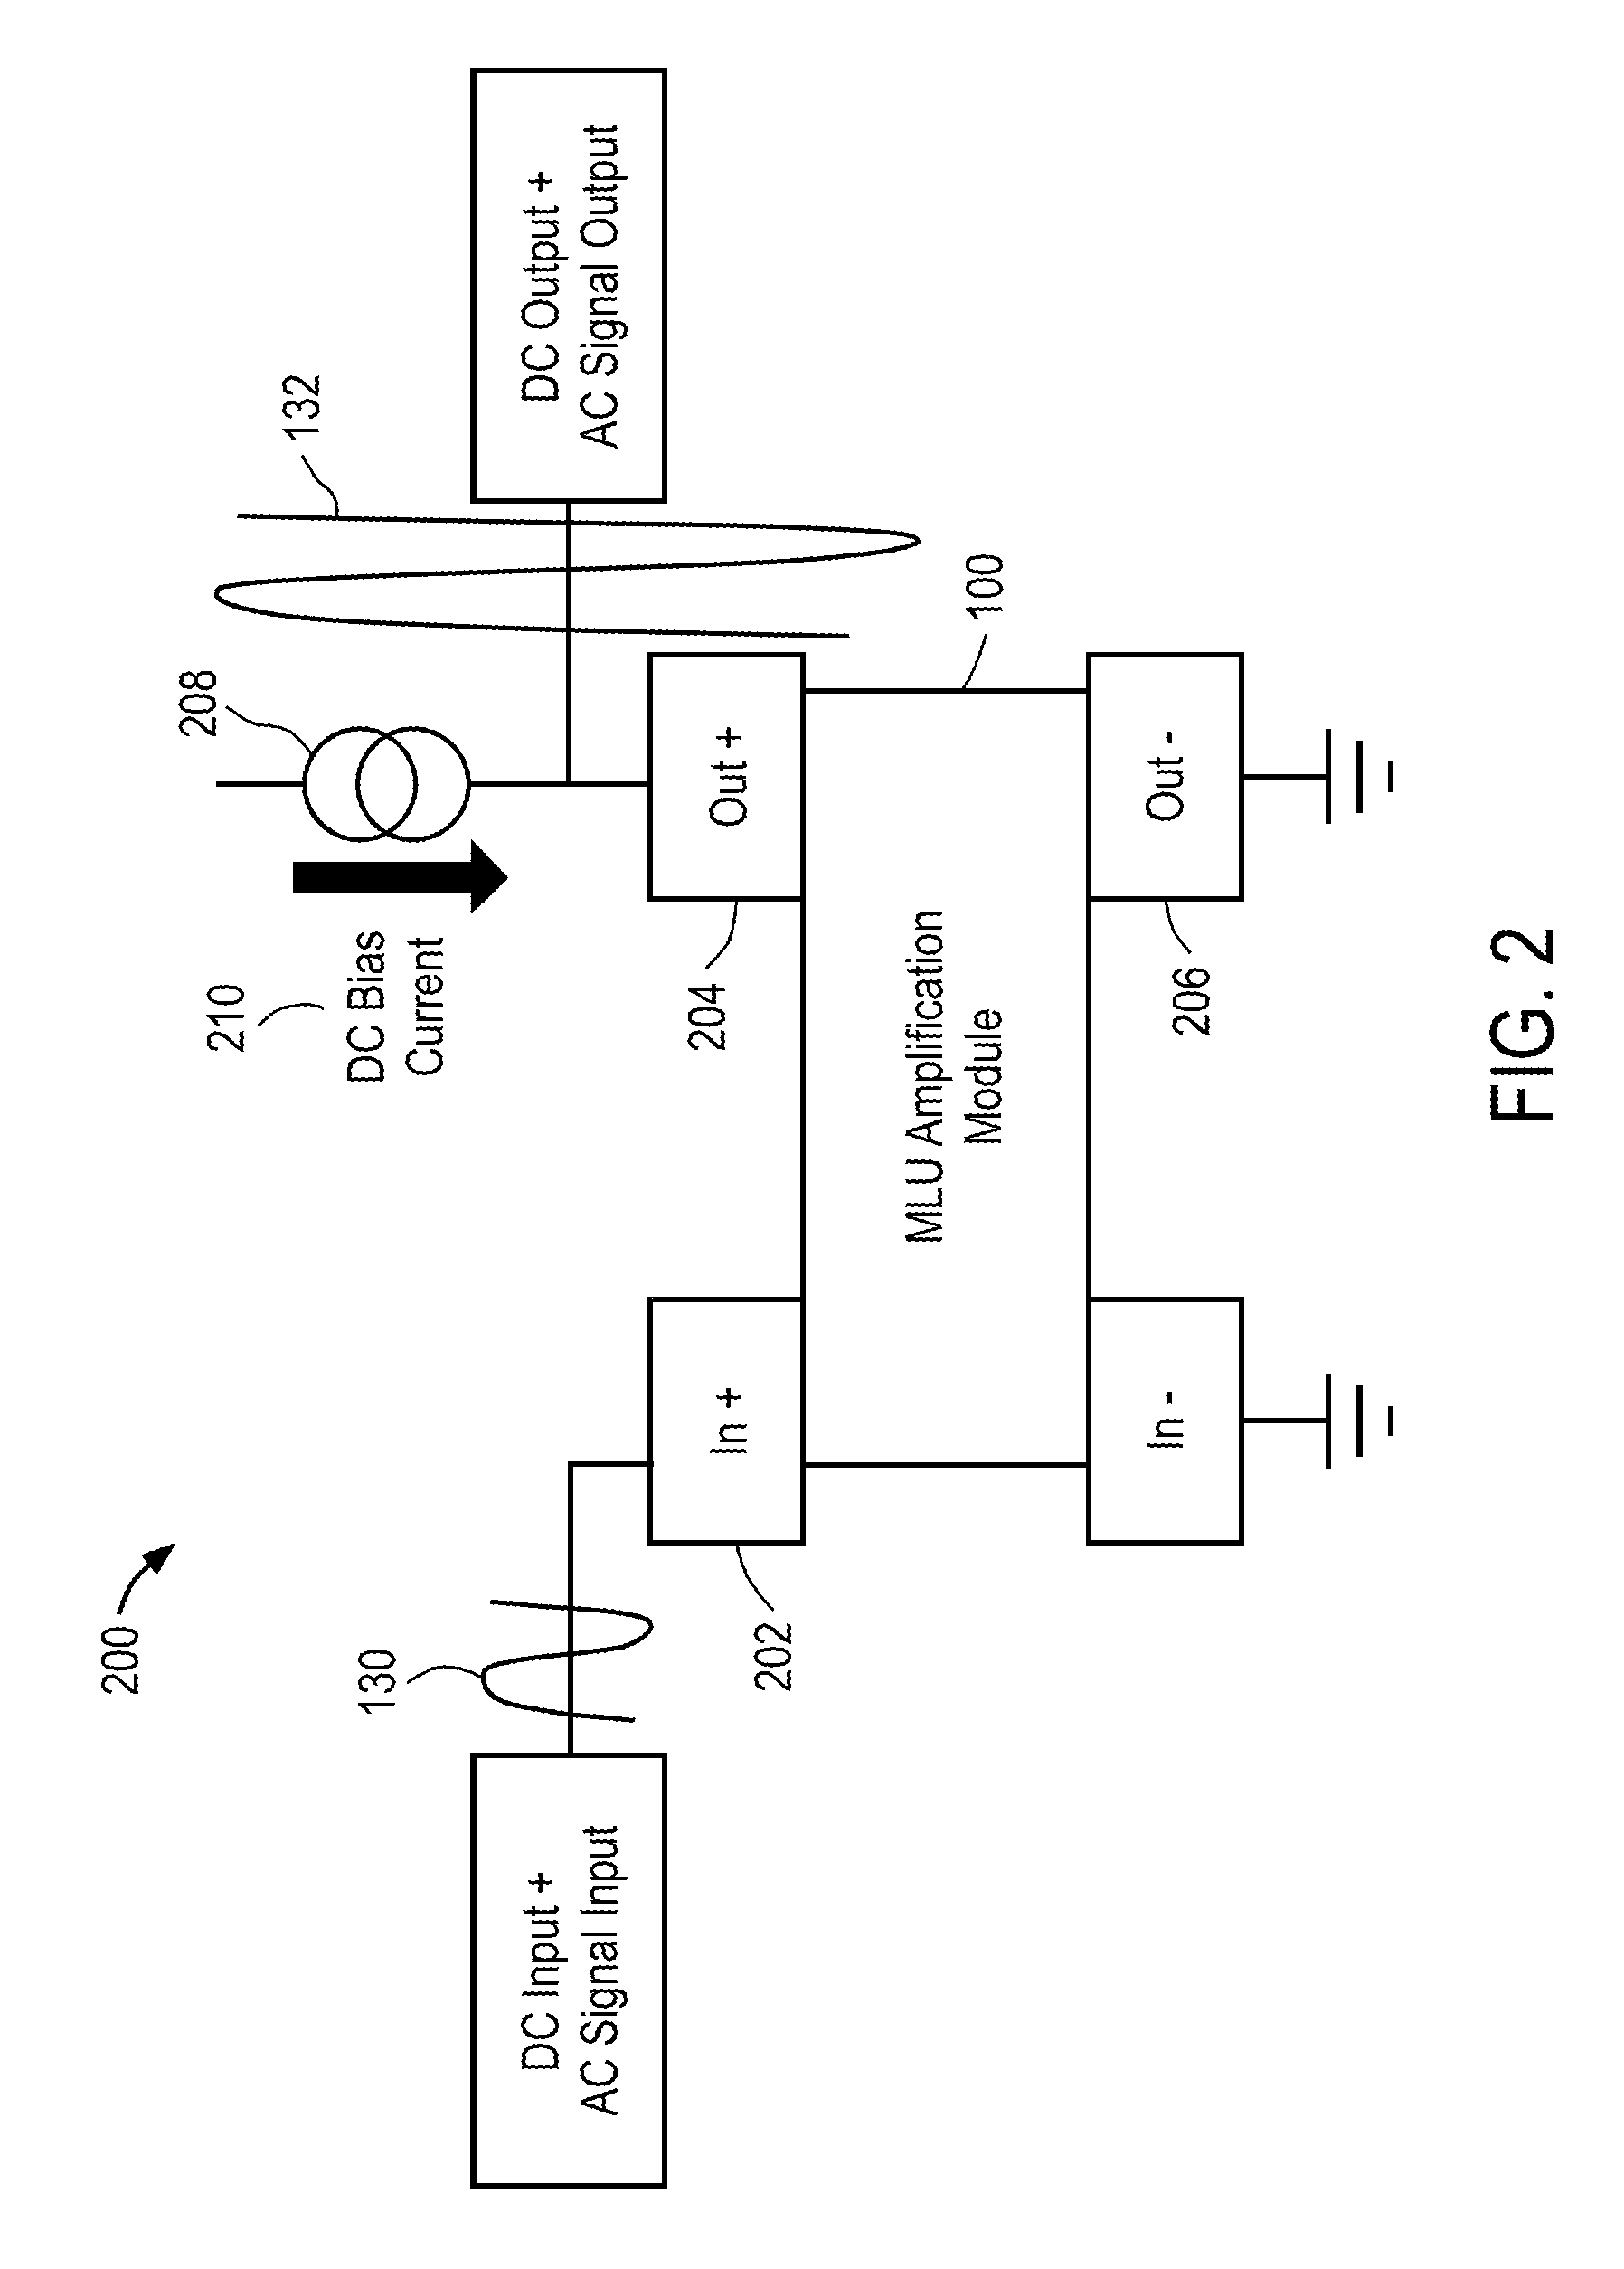 Magnetic logic units configured as an amplifier